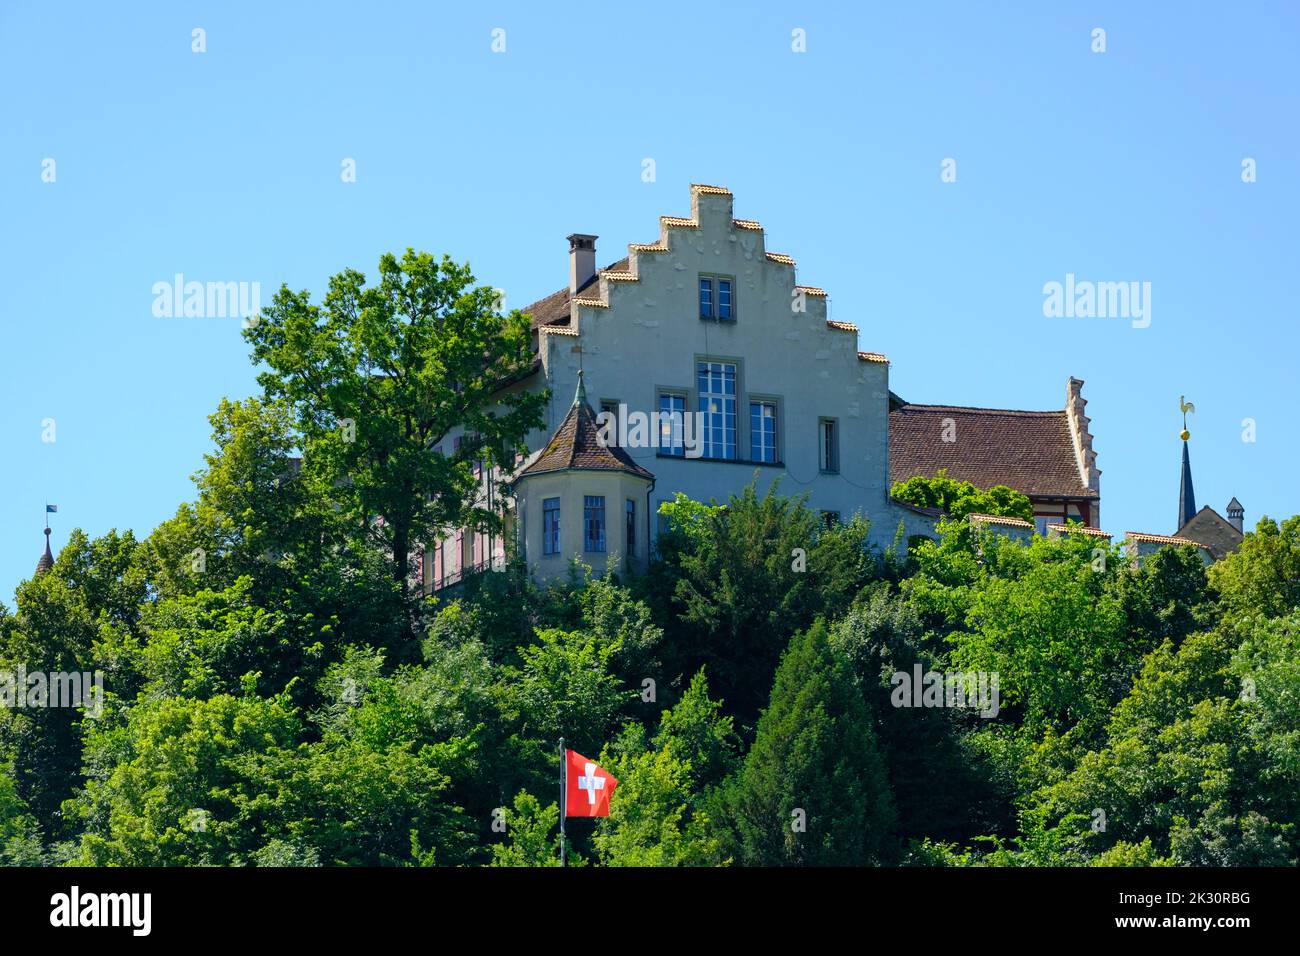 Switzerland, Canton of Zurich, Laufen Castle surrounded by green trees Stock Photo